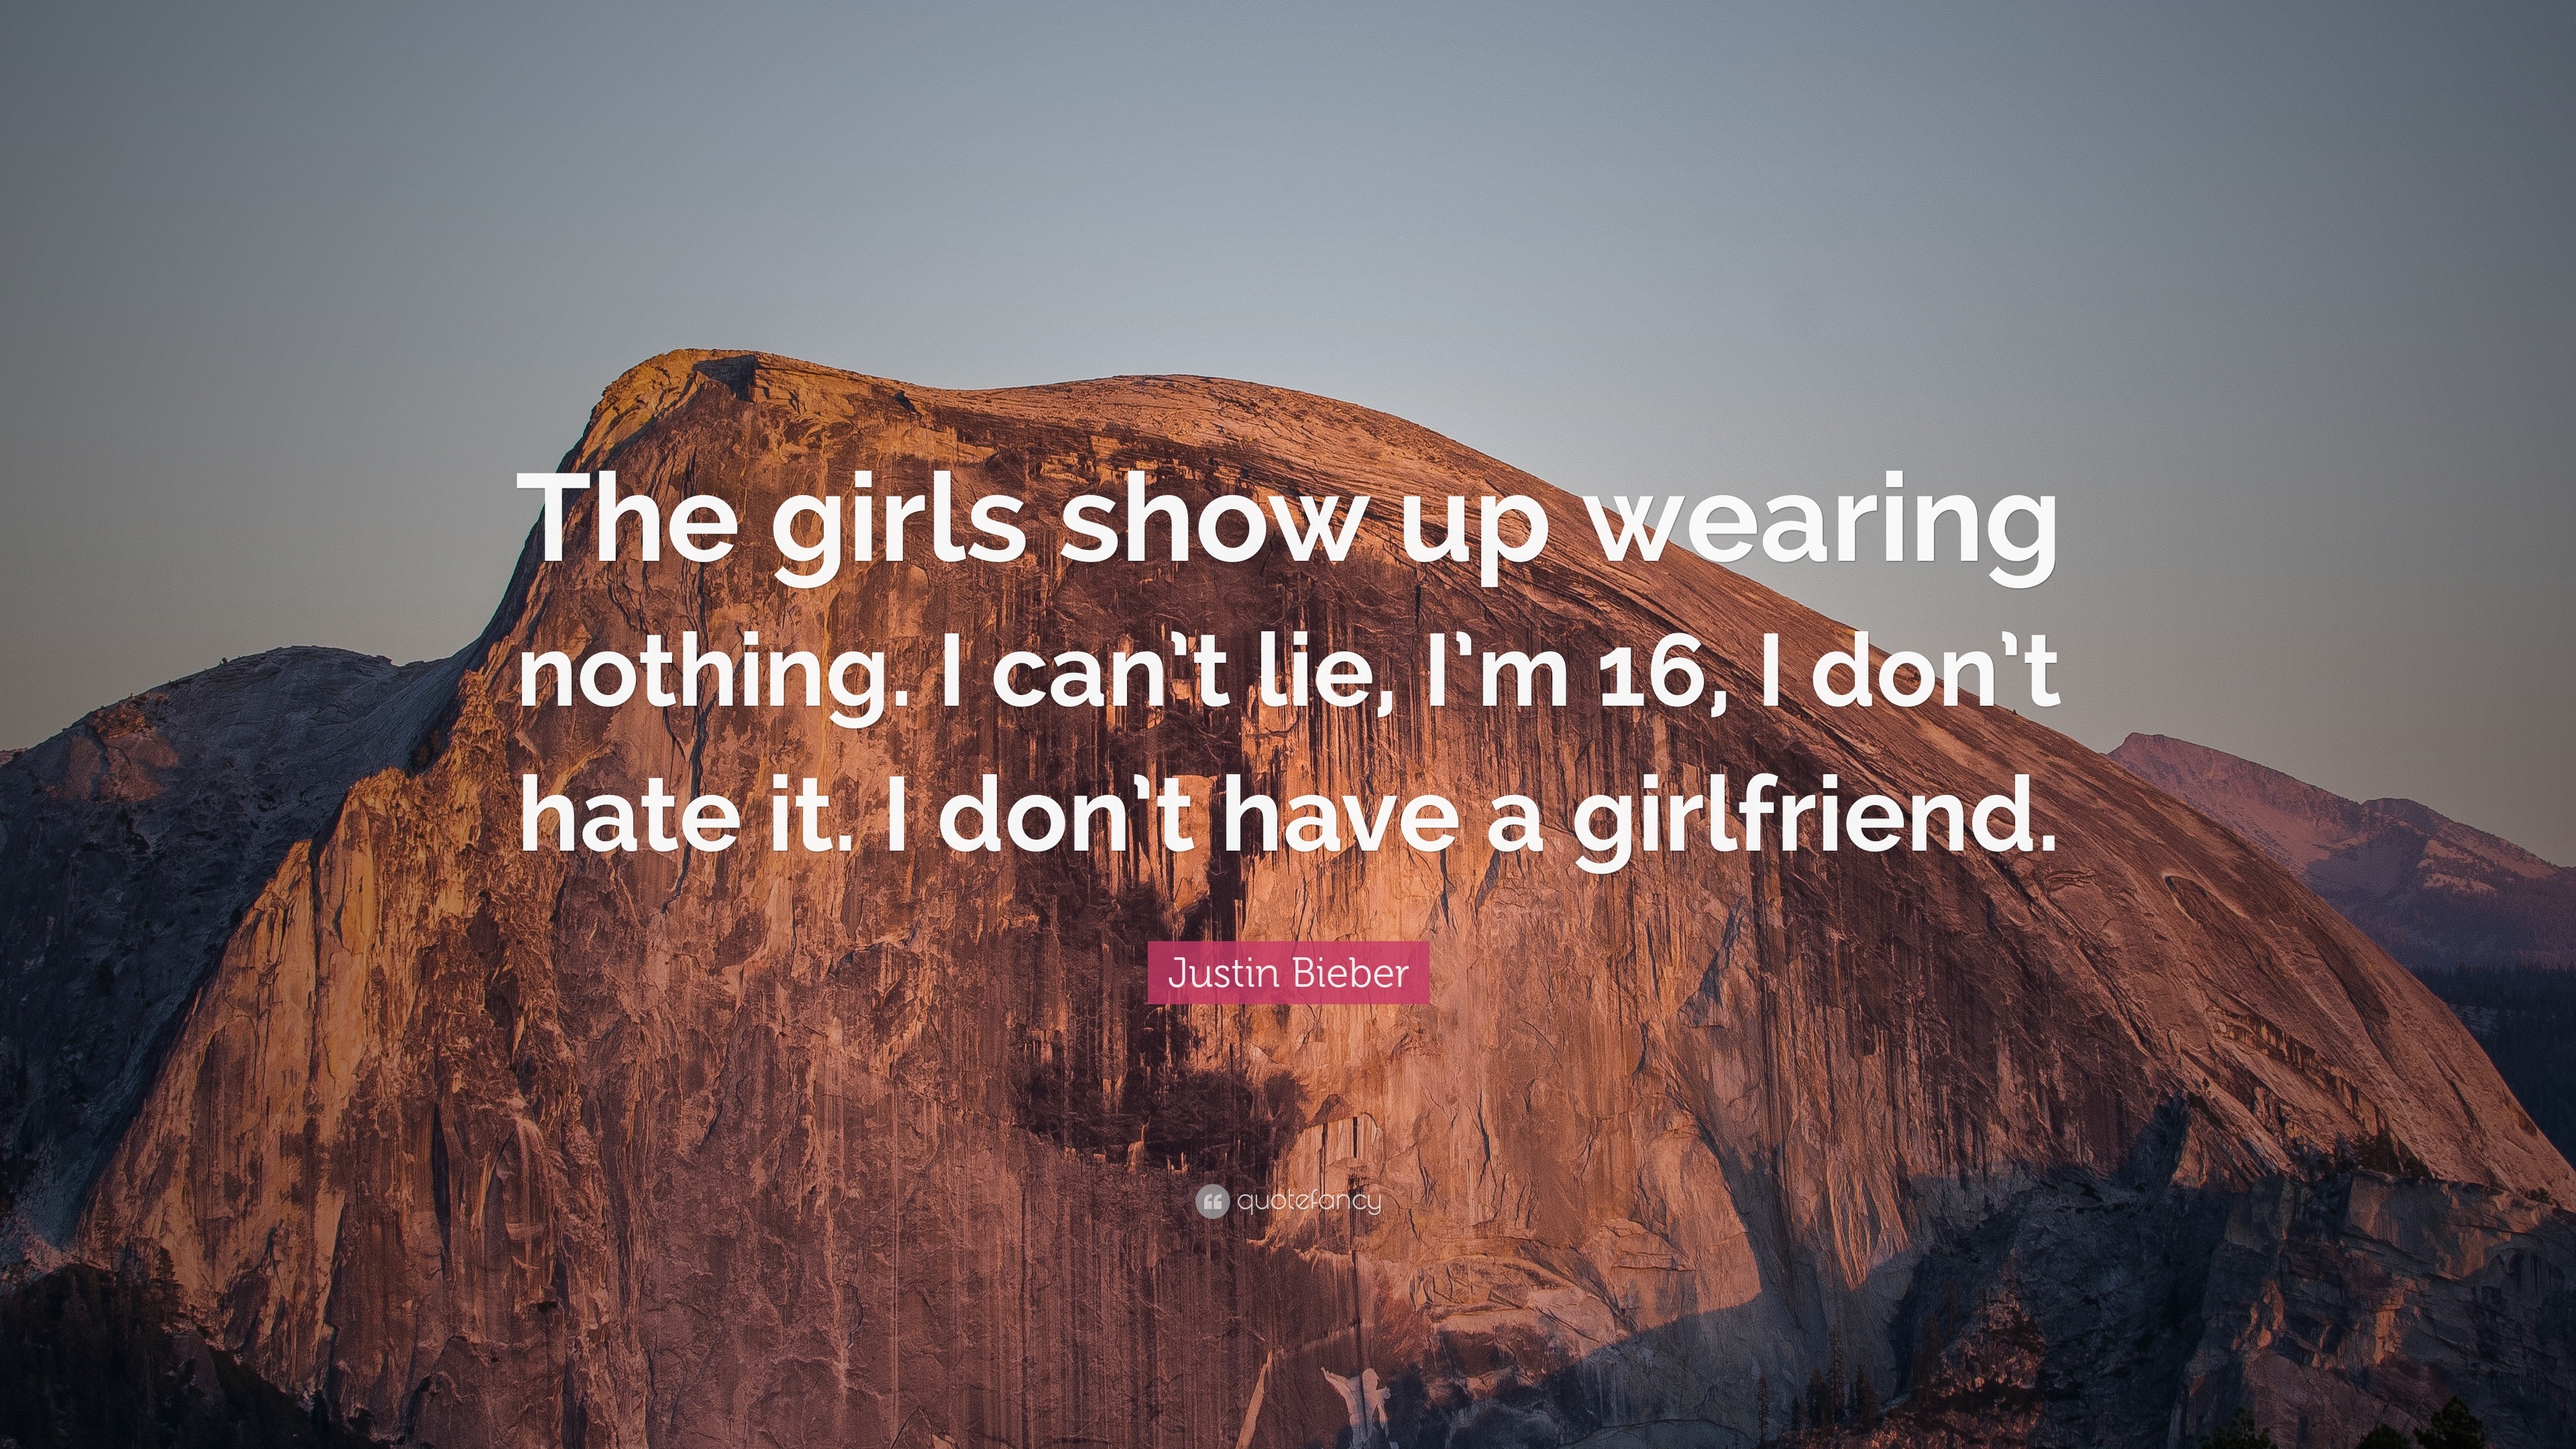 Justin Bieber Quote: “The girls show up wearing nothing. I can’t lie, I ...